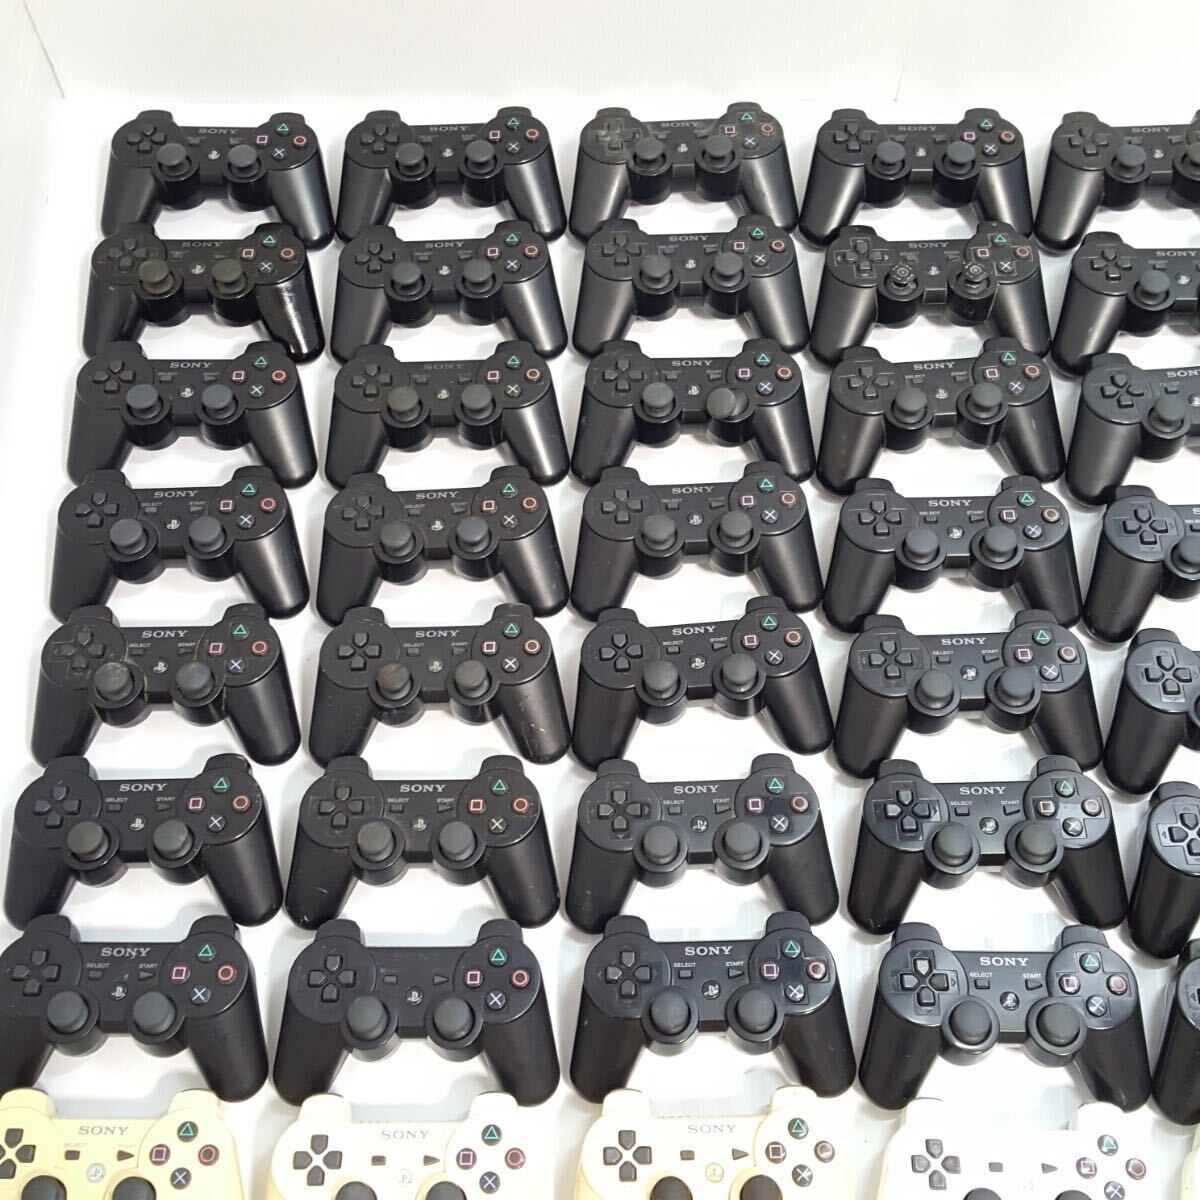 19) PS3 original controller DUALSHOCK3 SIXAXIS 83 point set sale Junk operation not yet verification dual shock 3 SONY PlayStation 3